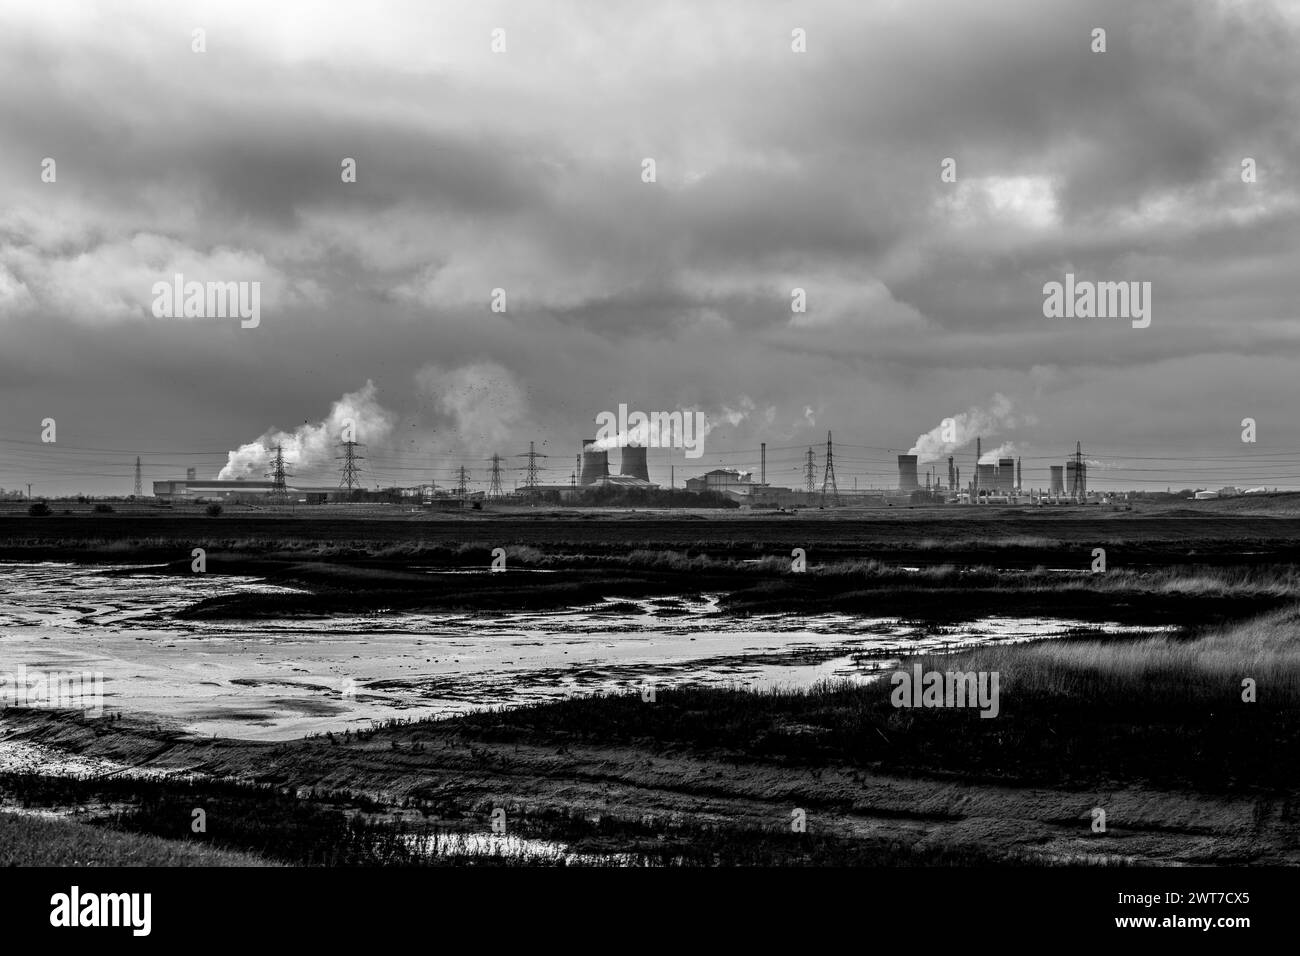 Black and white industrial landscape in the North East of England. Marshland in the foreground with cooling towers and pylons across the horizon. UK Stock Photo